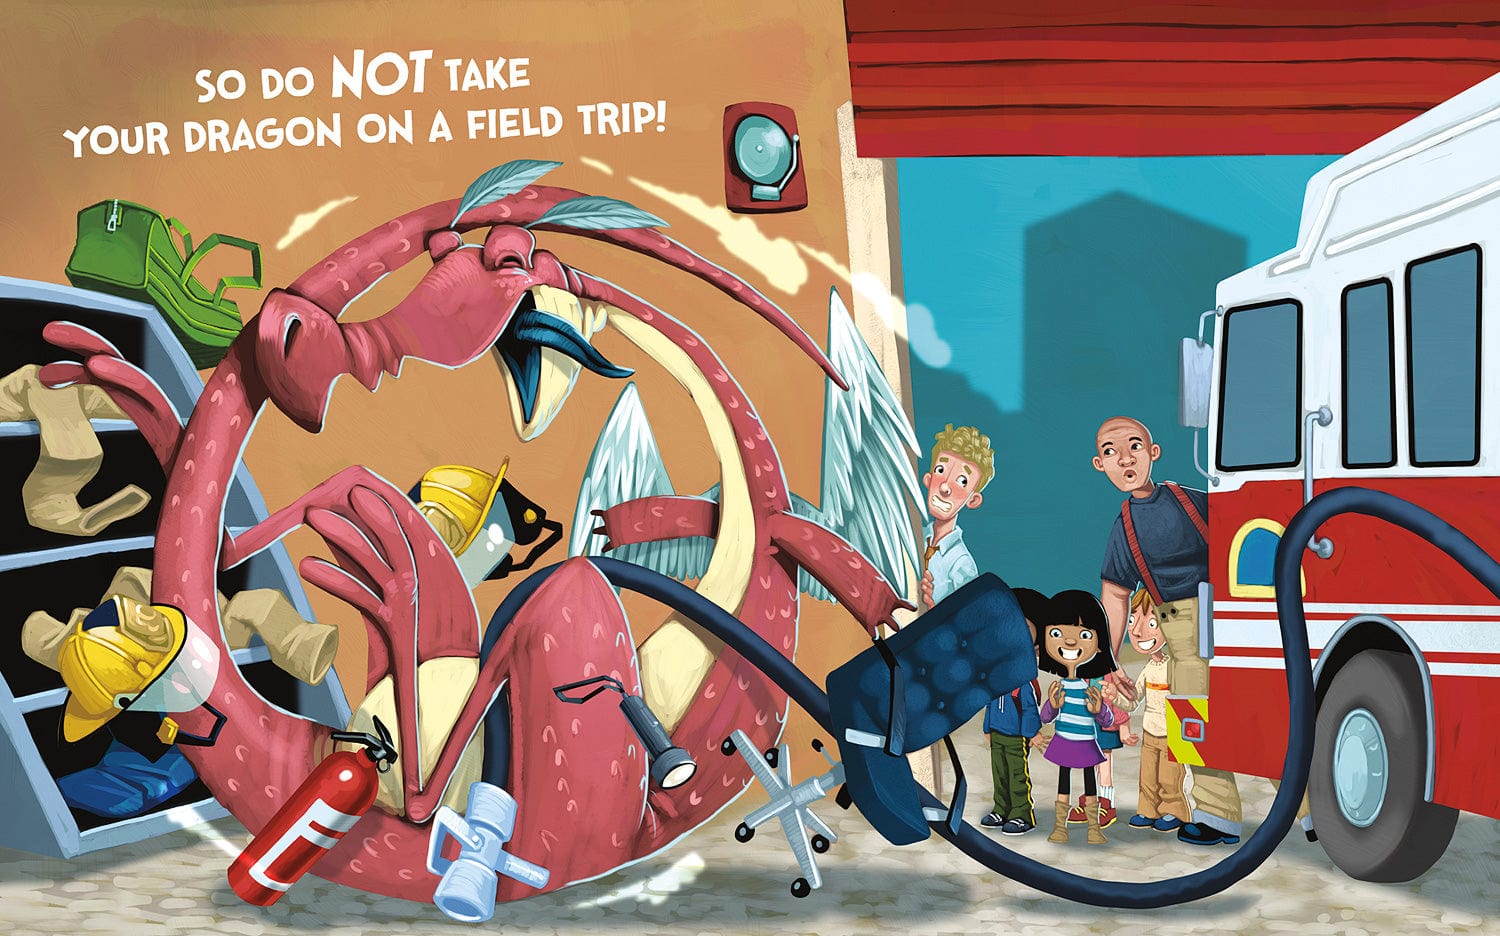 Do Not Take Your Dragon on a Field Trip - Saltire Games